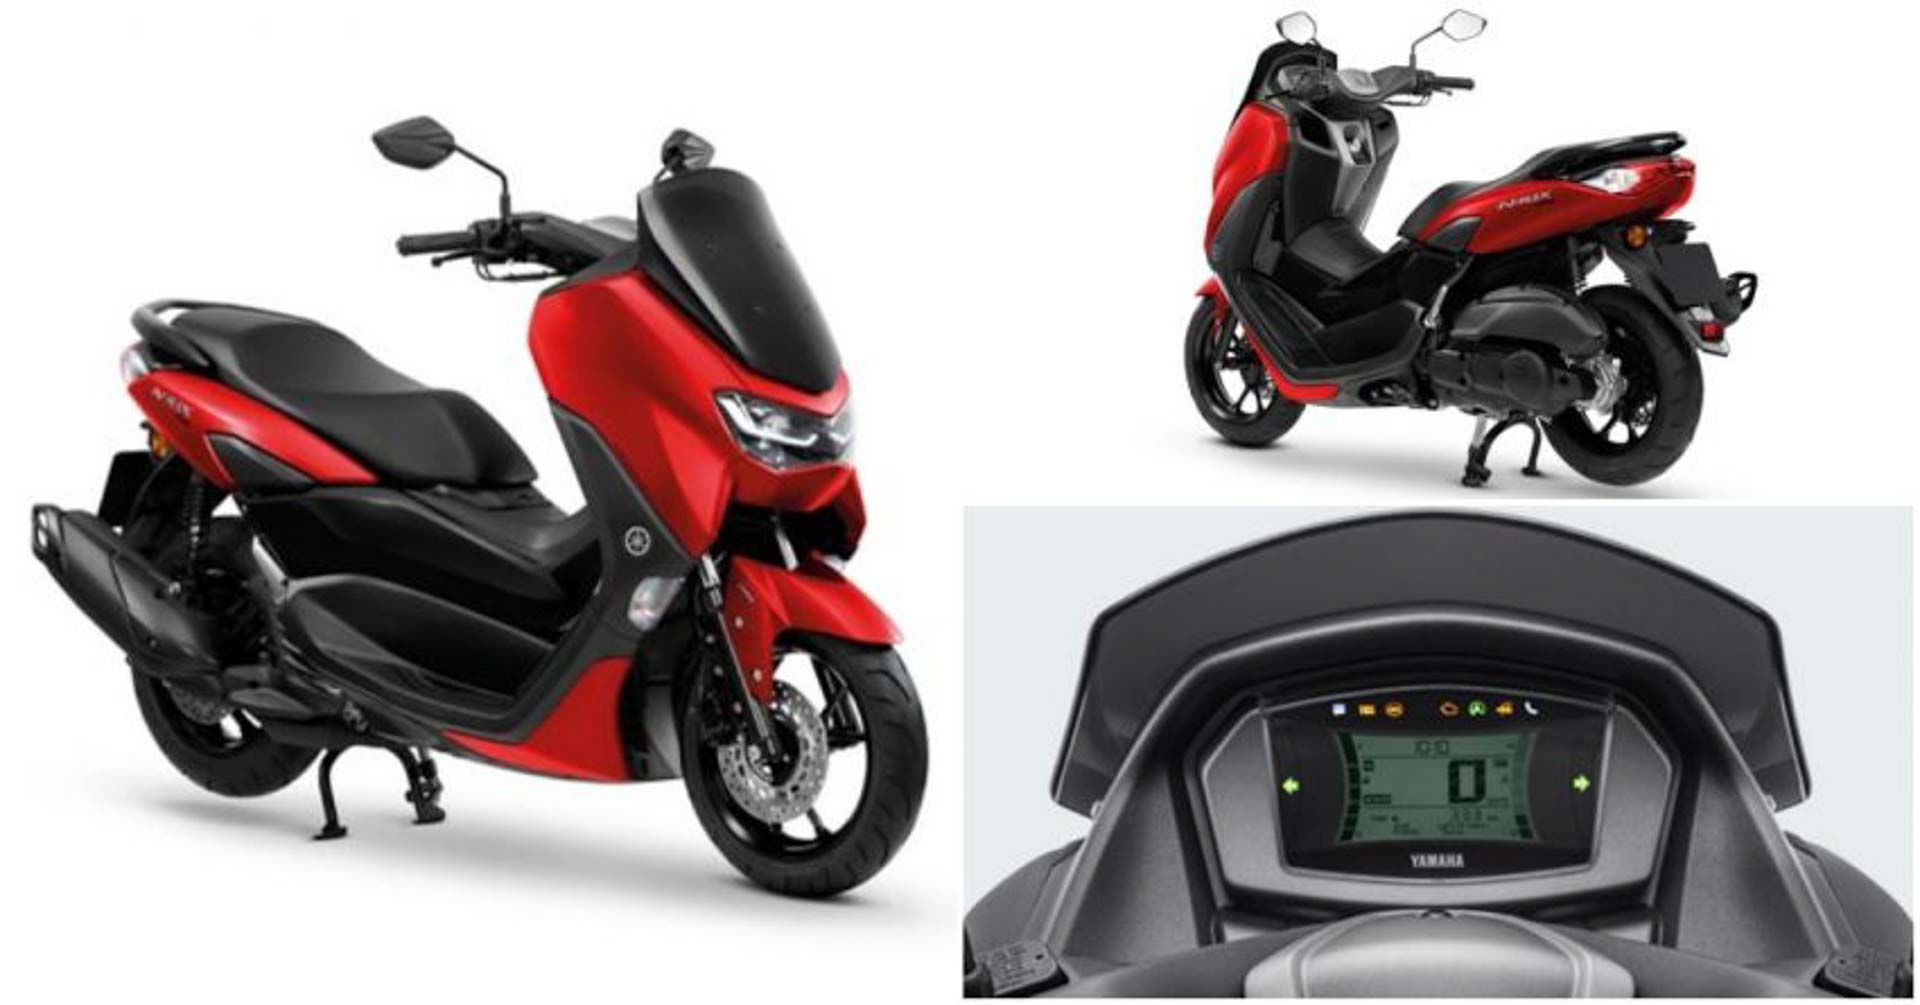 2022 Yamaha NMax 155 Launched With Many Updates